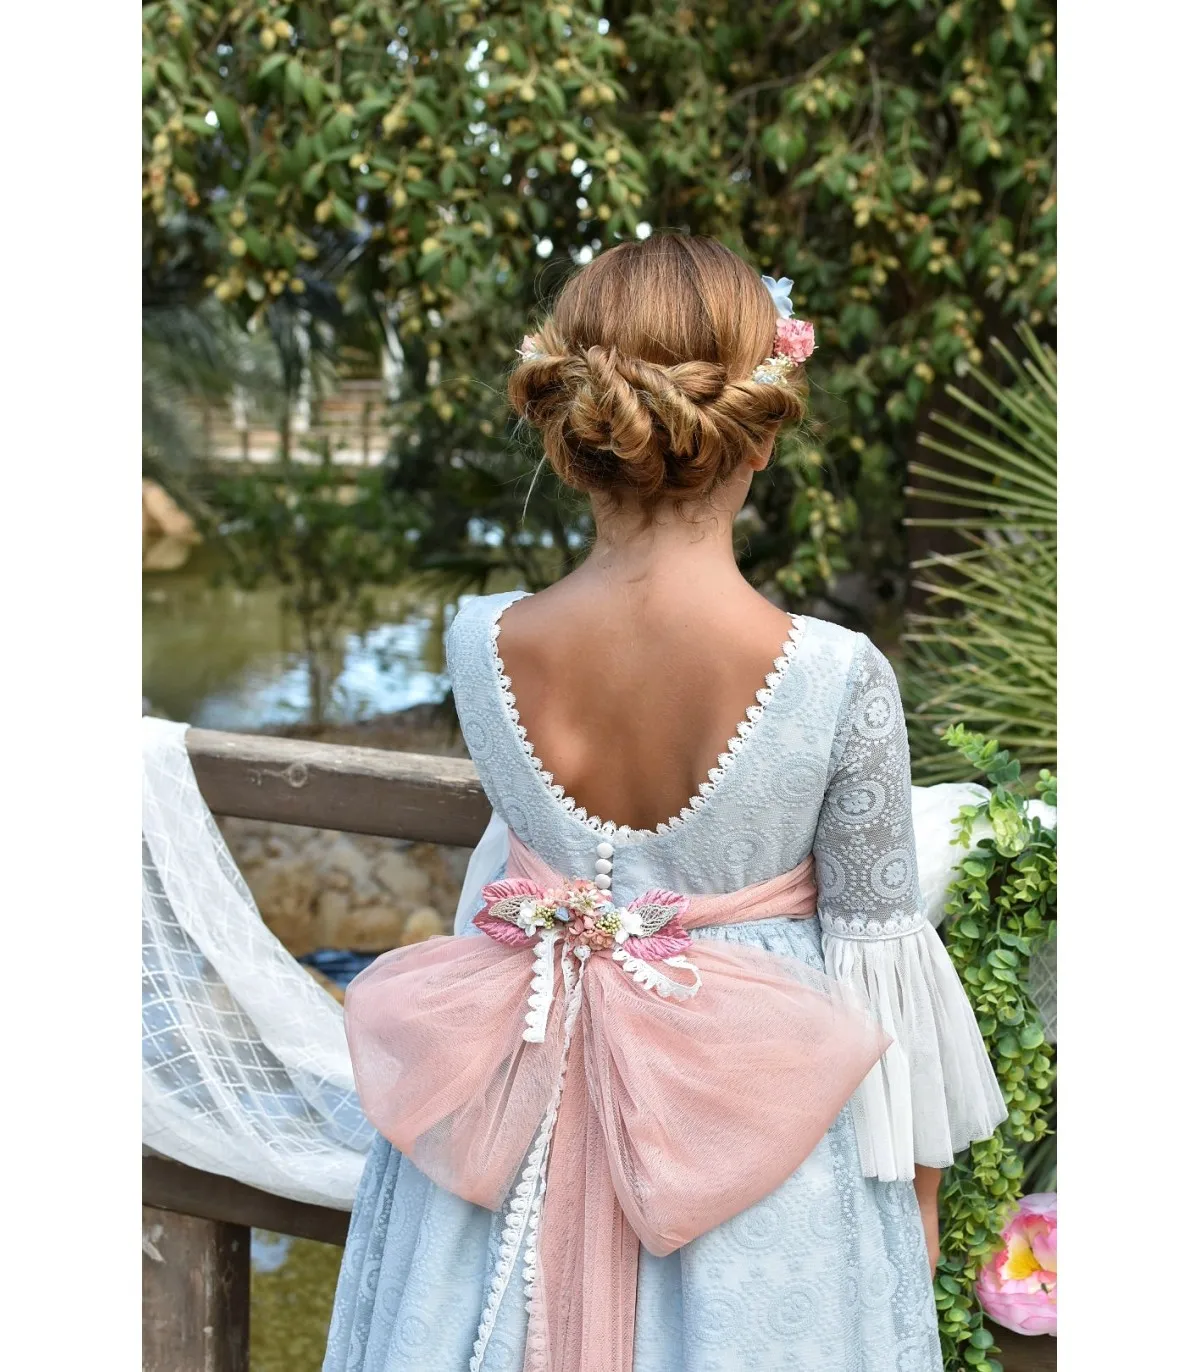 FATAPAESE Fairy Flower Girl Dress for Kid Vintage Princess Lace Floral Ribbon Belt Bridemini Bridesmaid Wedding Party Tulle Gown